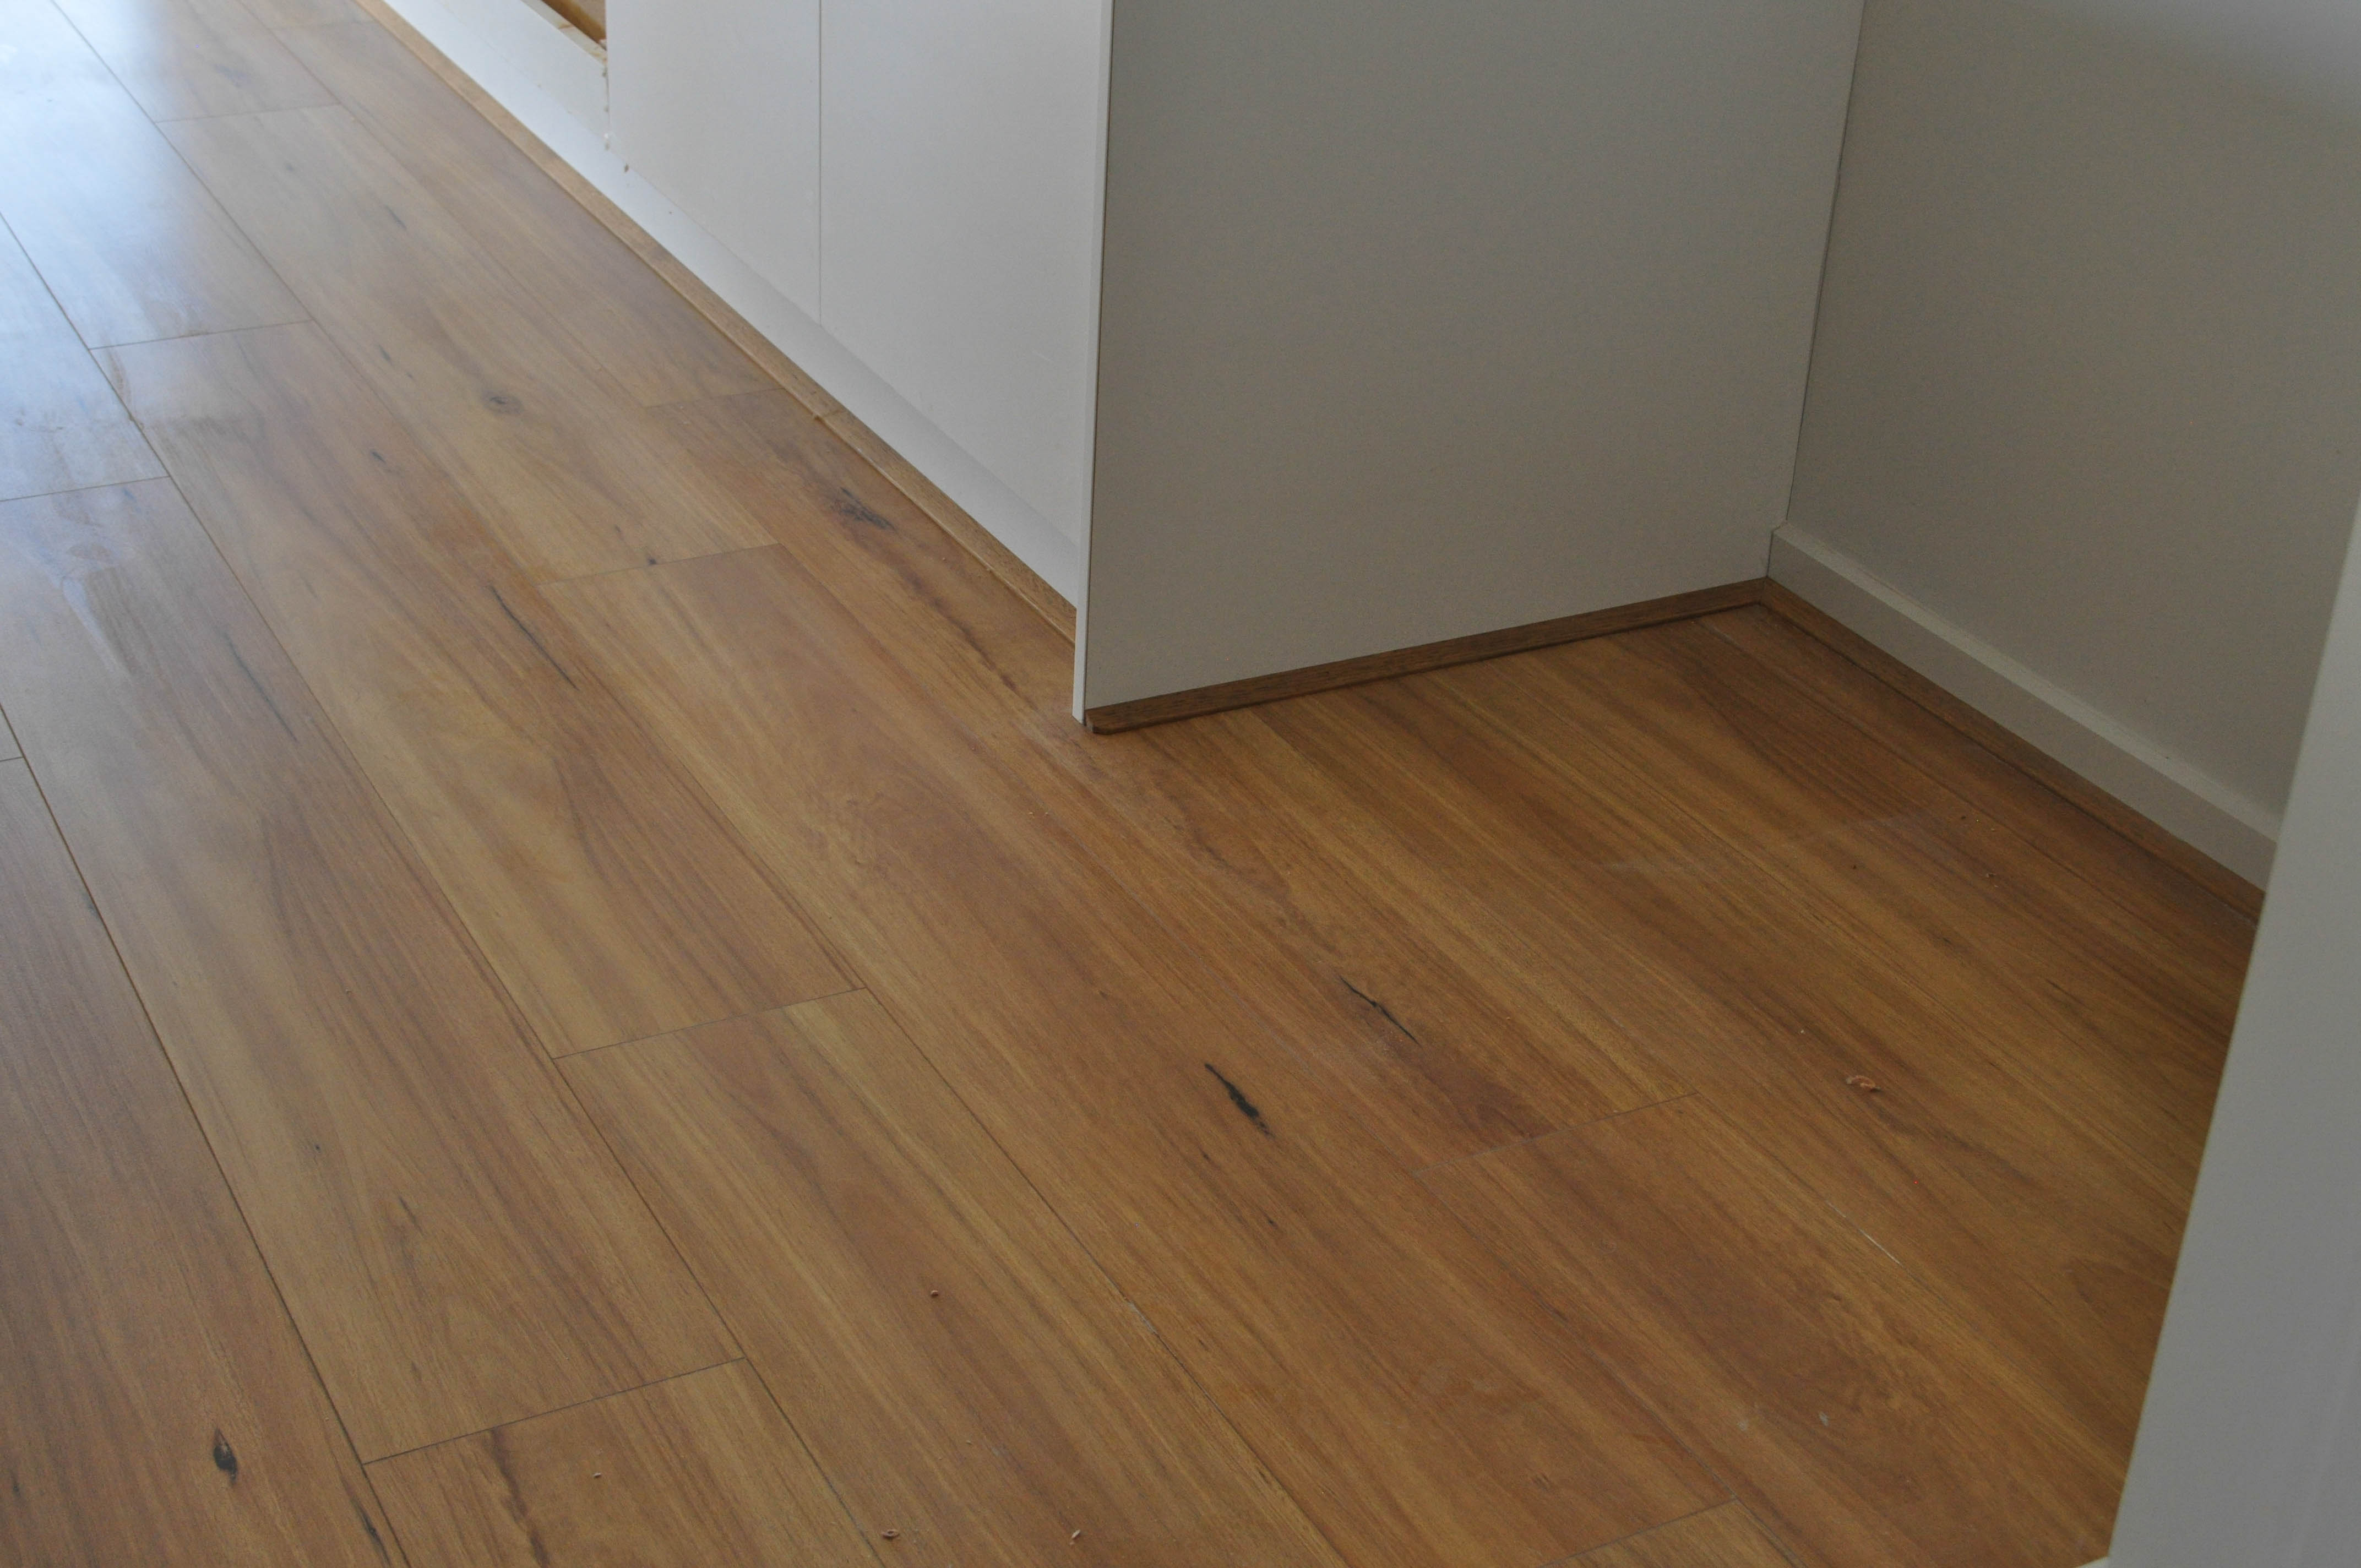 The laminate flooring installation in a kitchen in Werribee by Concord floors.